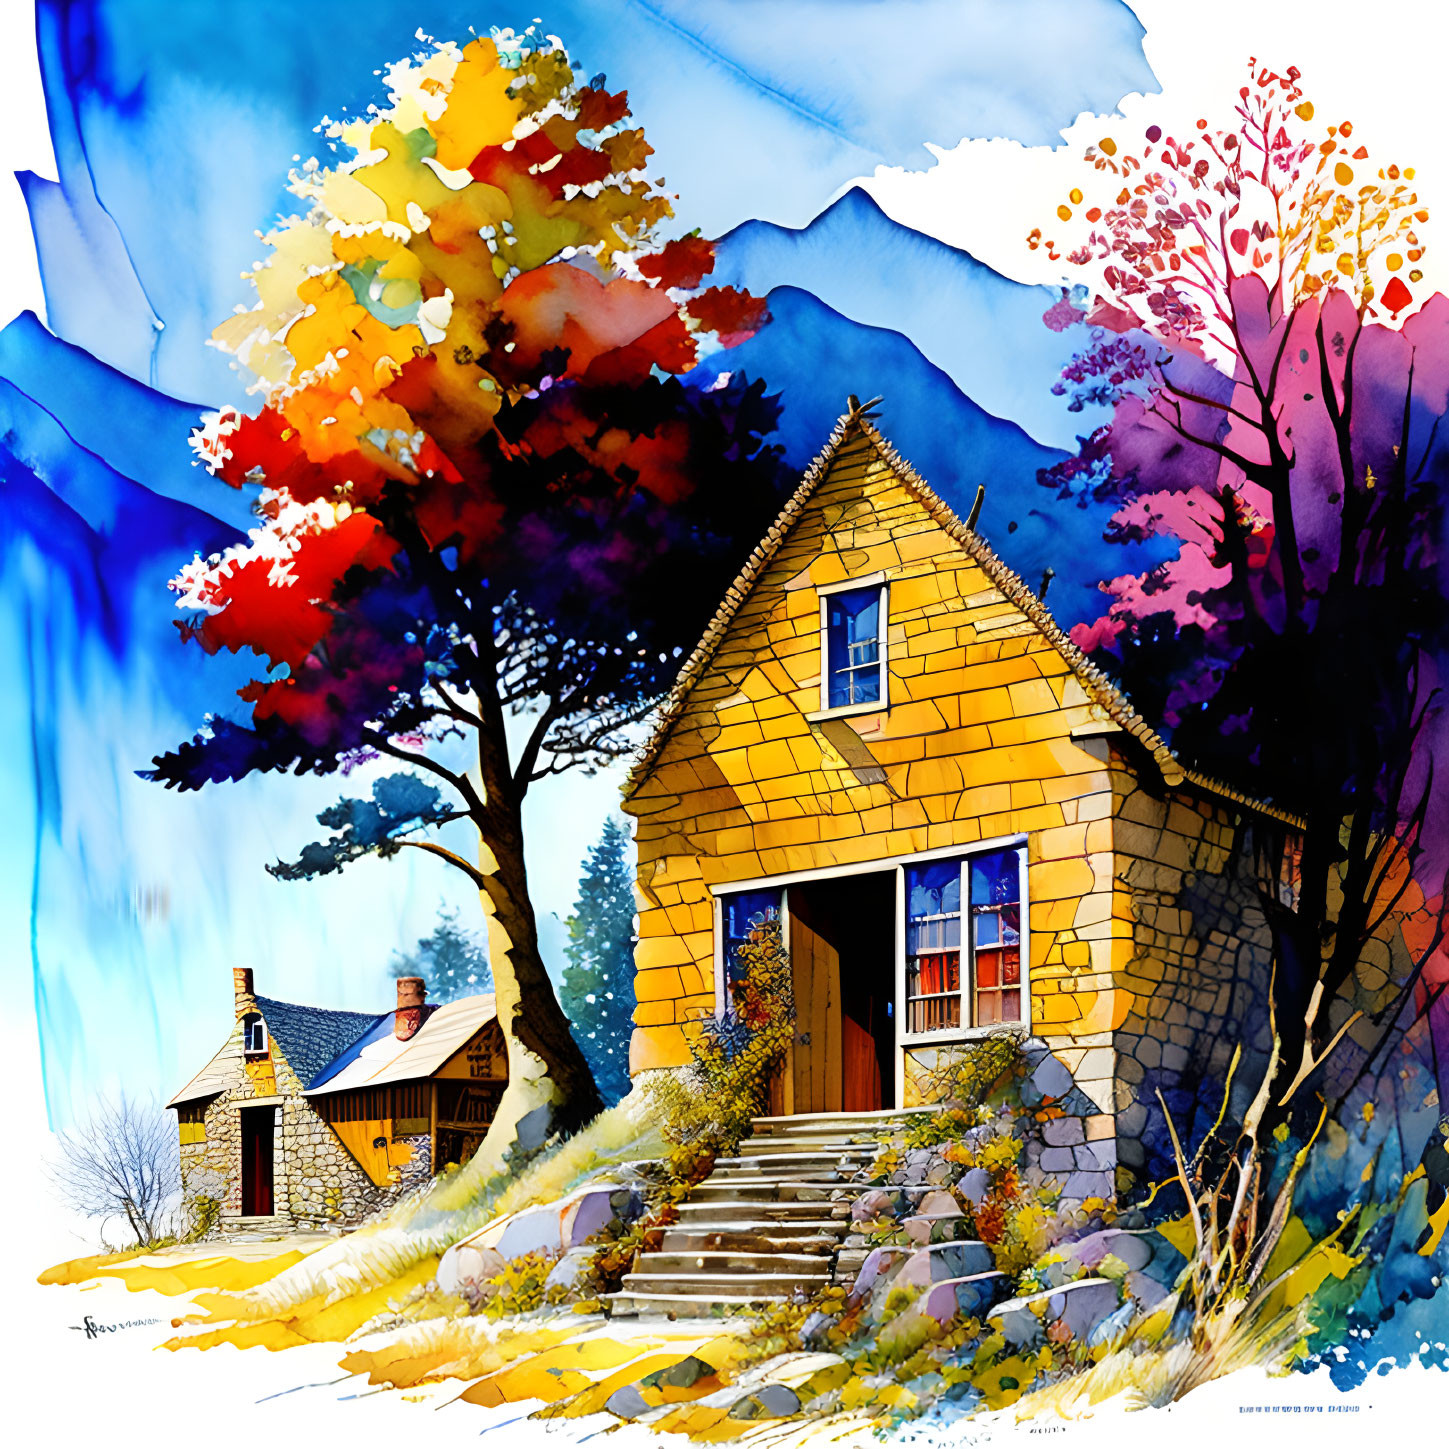 Colorful autumn forest watercolor painting of stone cottage nestled in mountains